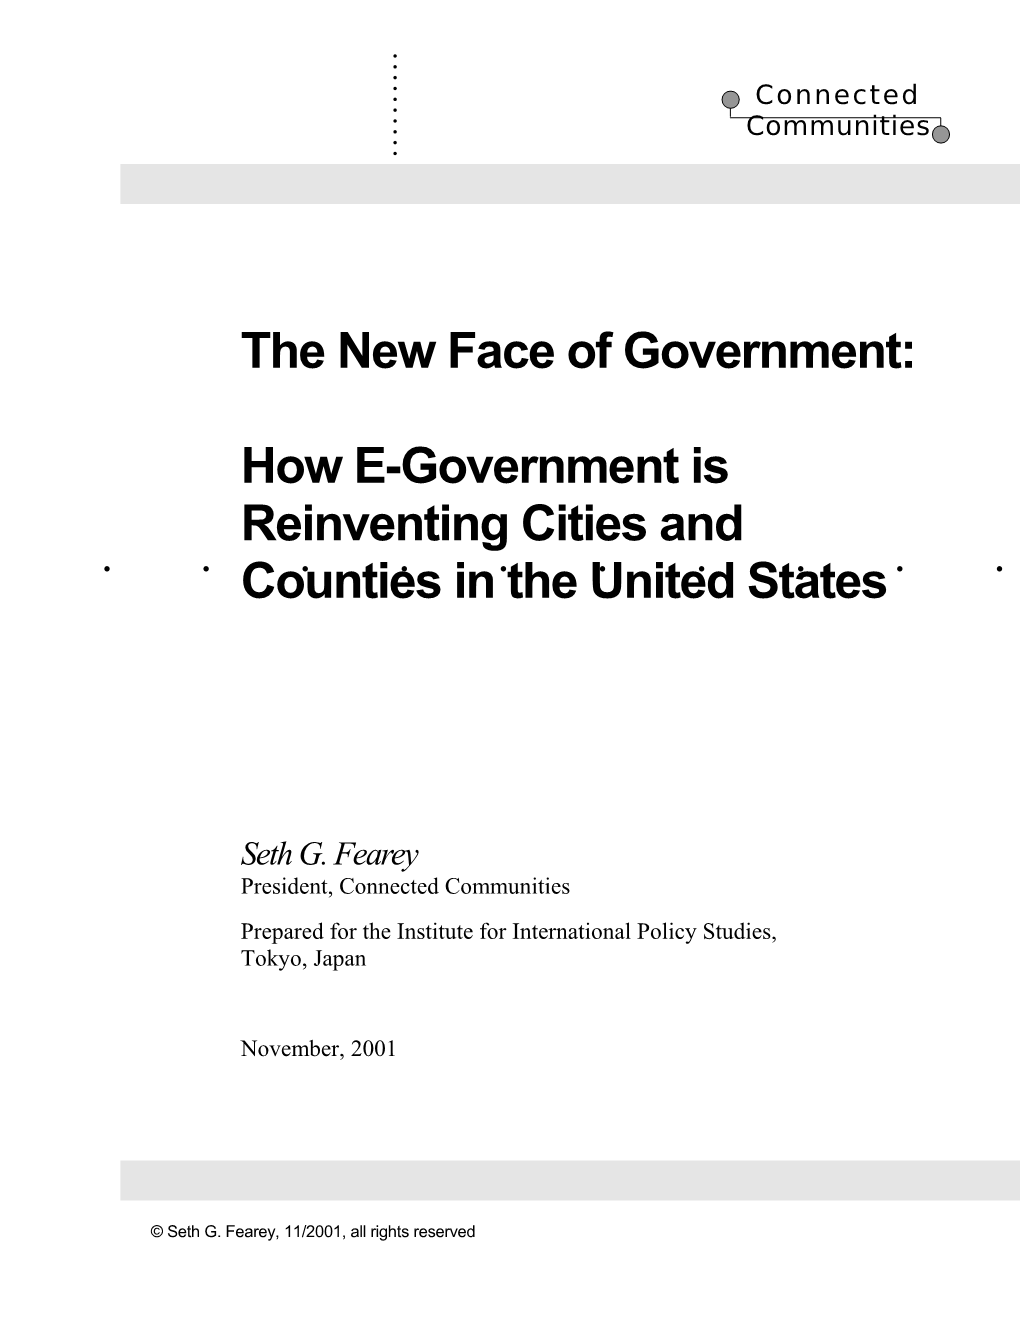 The New Face of Government: How E-Government Is Reinventing Cities and Counties in The